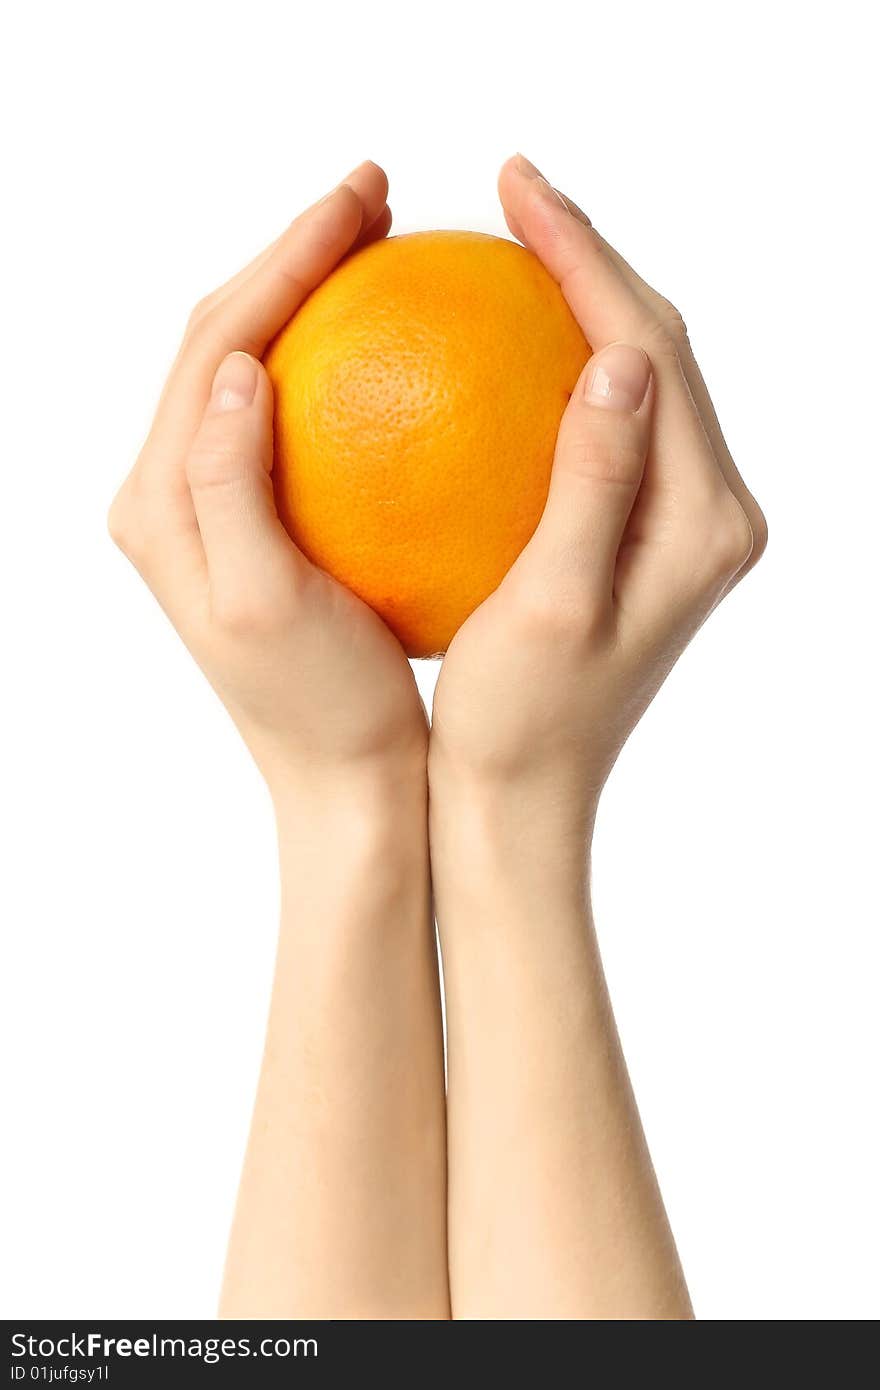 Grapefruit in human hands over white. Grapefruit in human hands over white